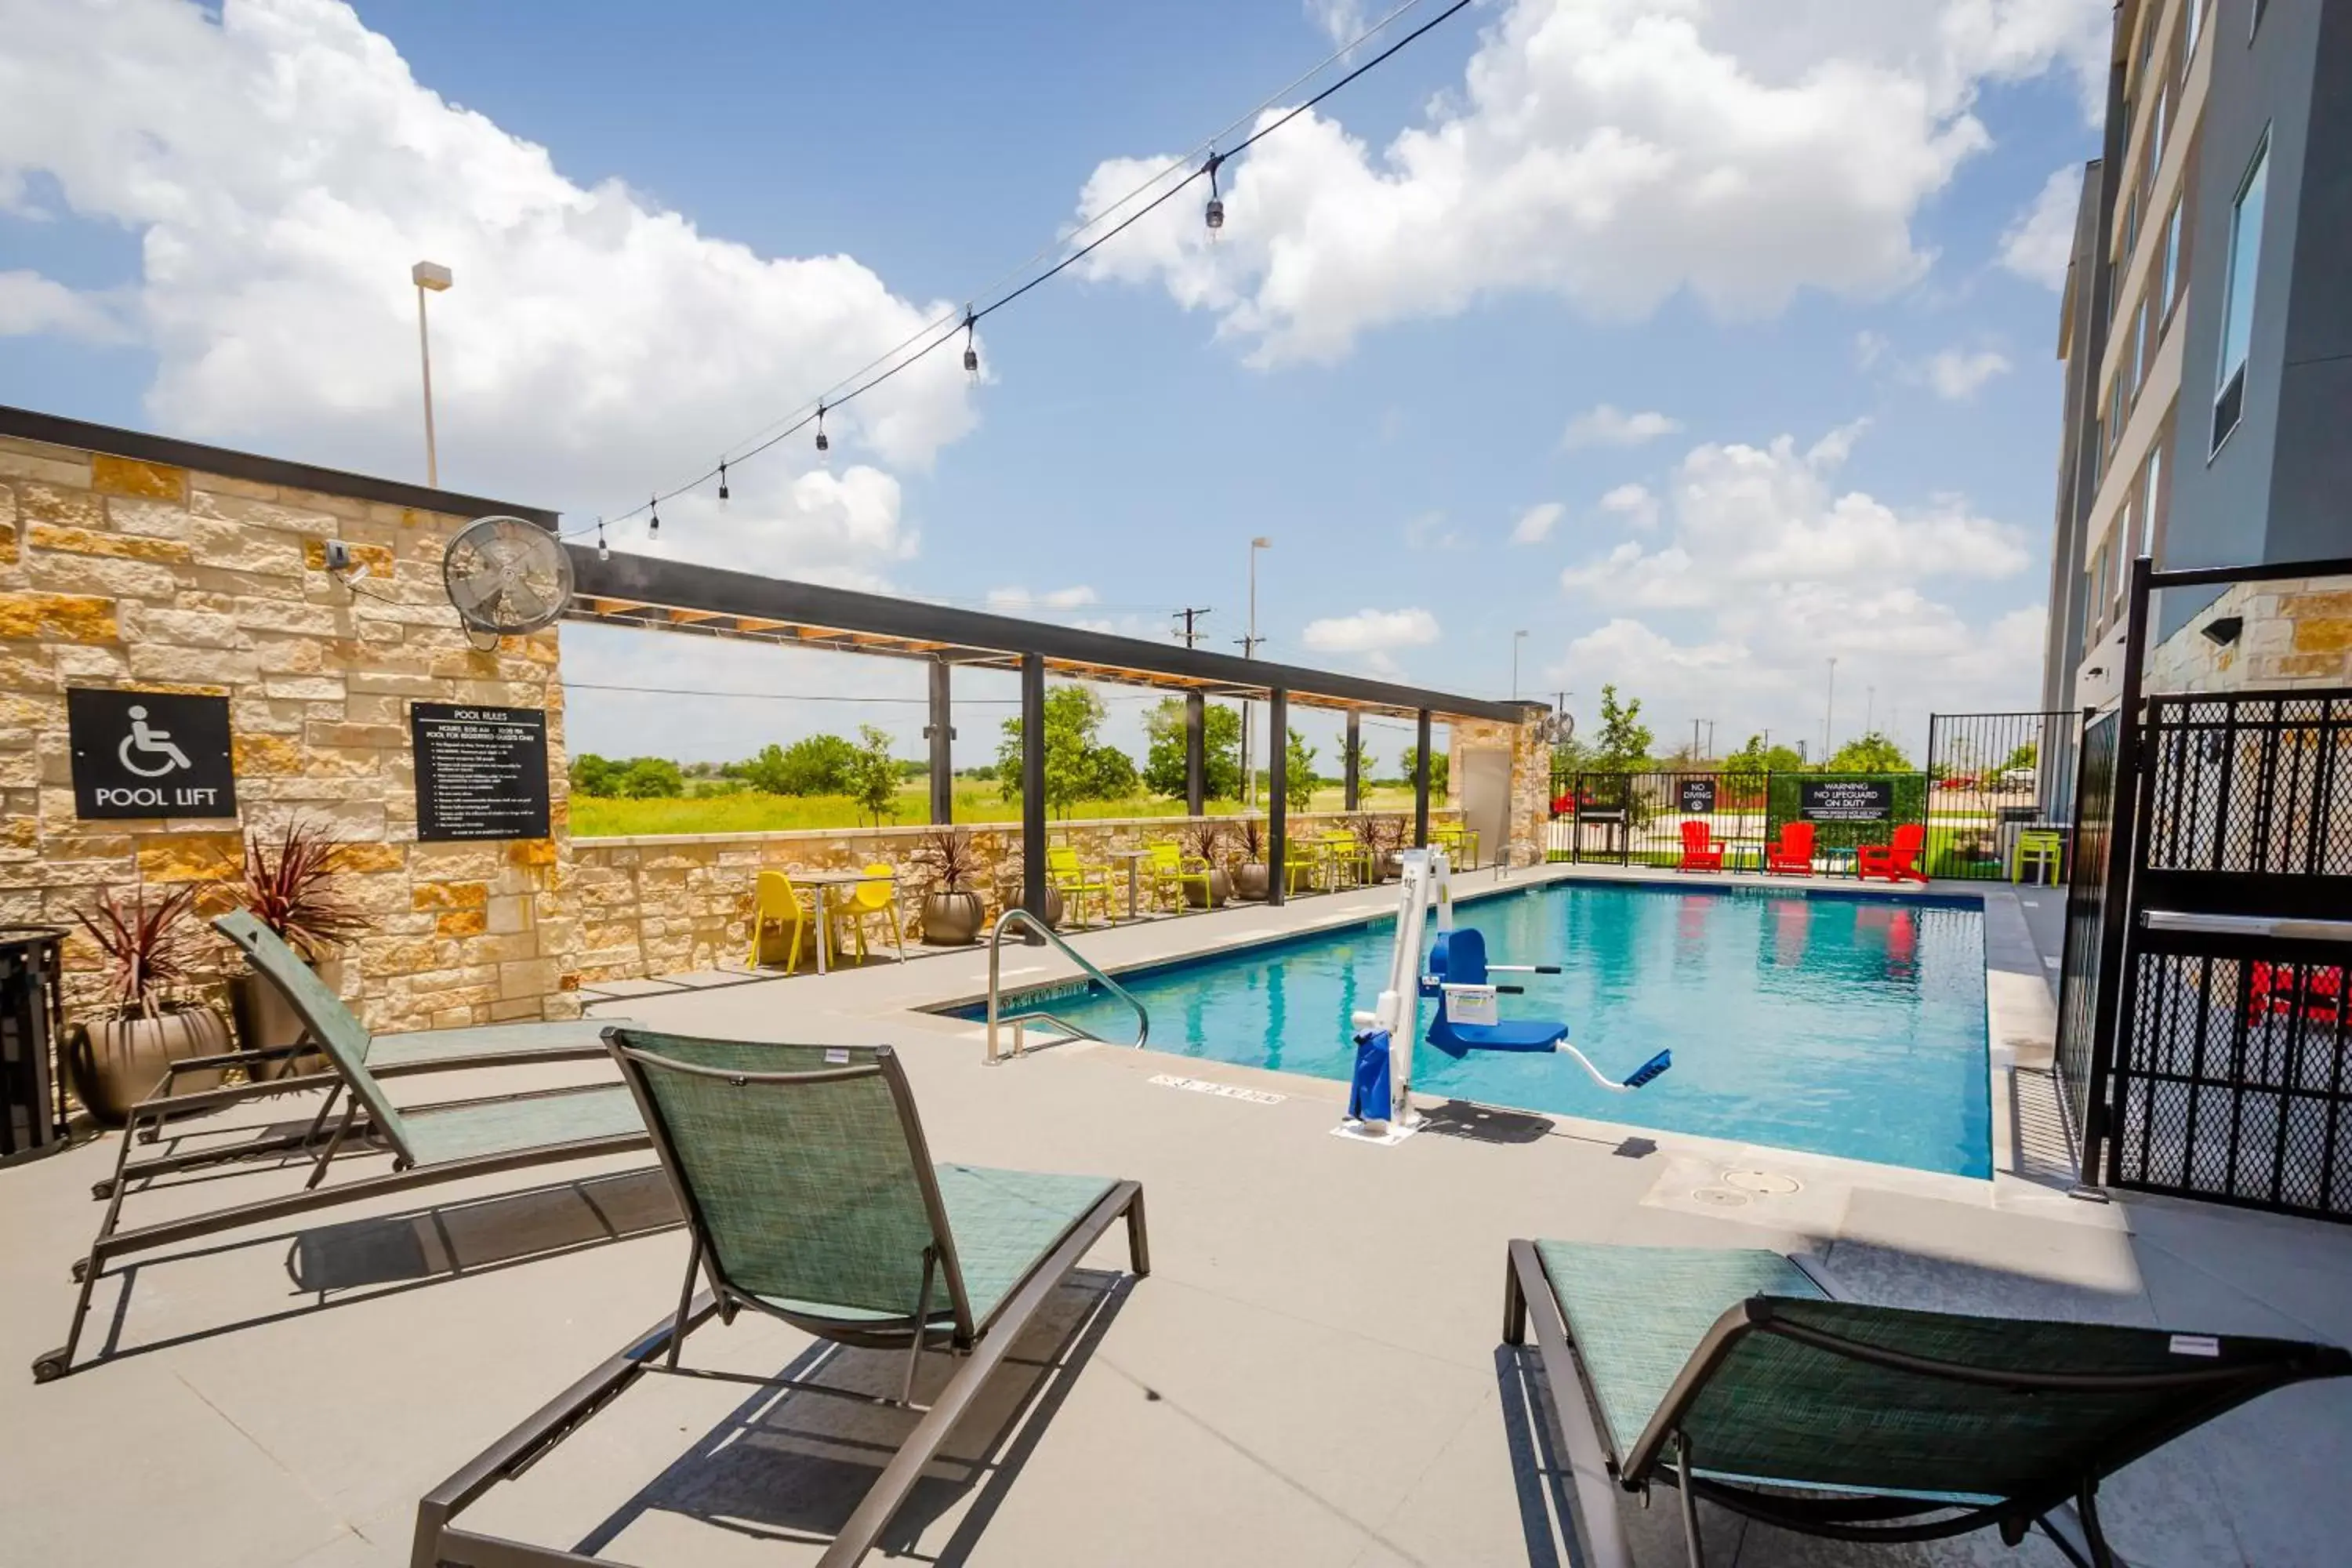 Pool view, Swimming Pool in Tru by Hilton Pflugerville, TX